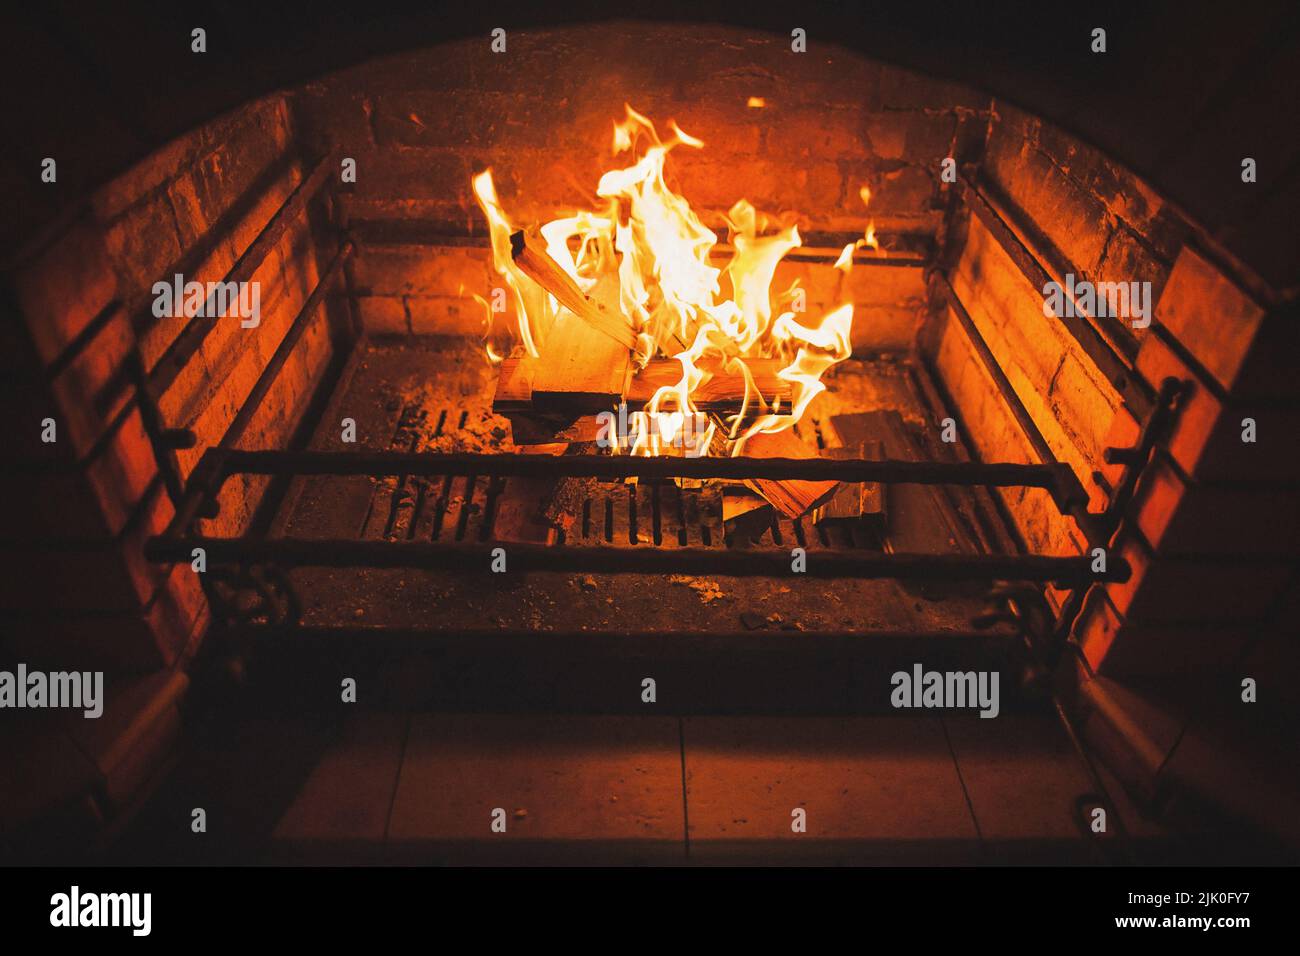 Bright fire burns in a stone fireplace. Stock Photo